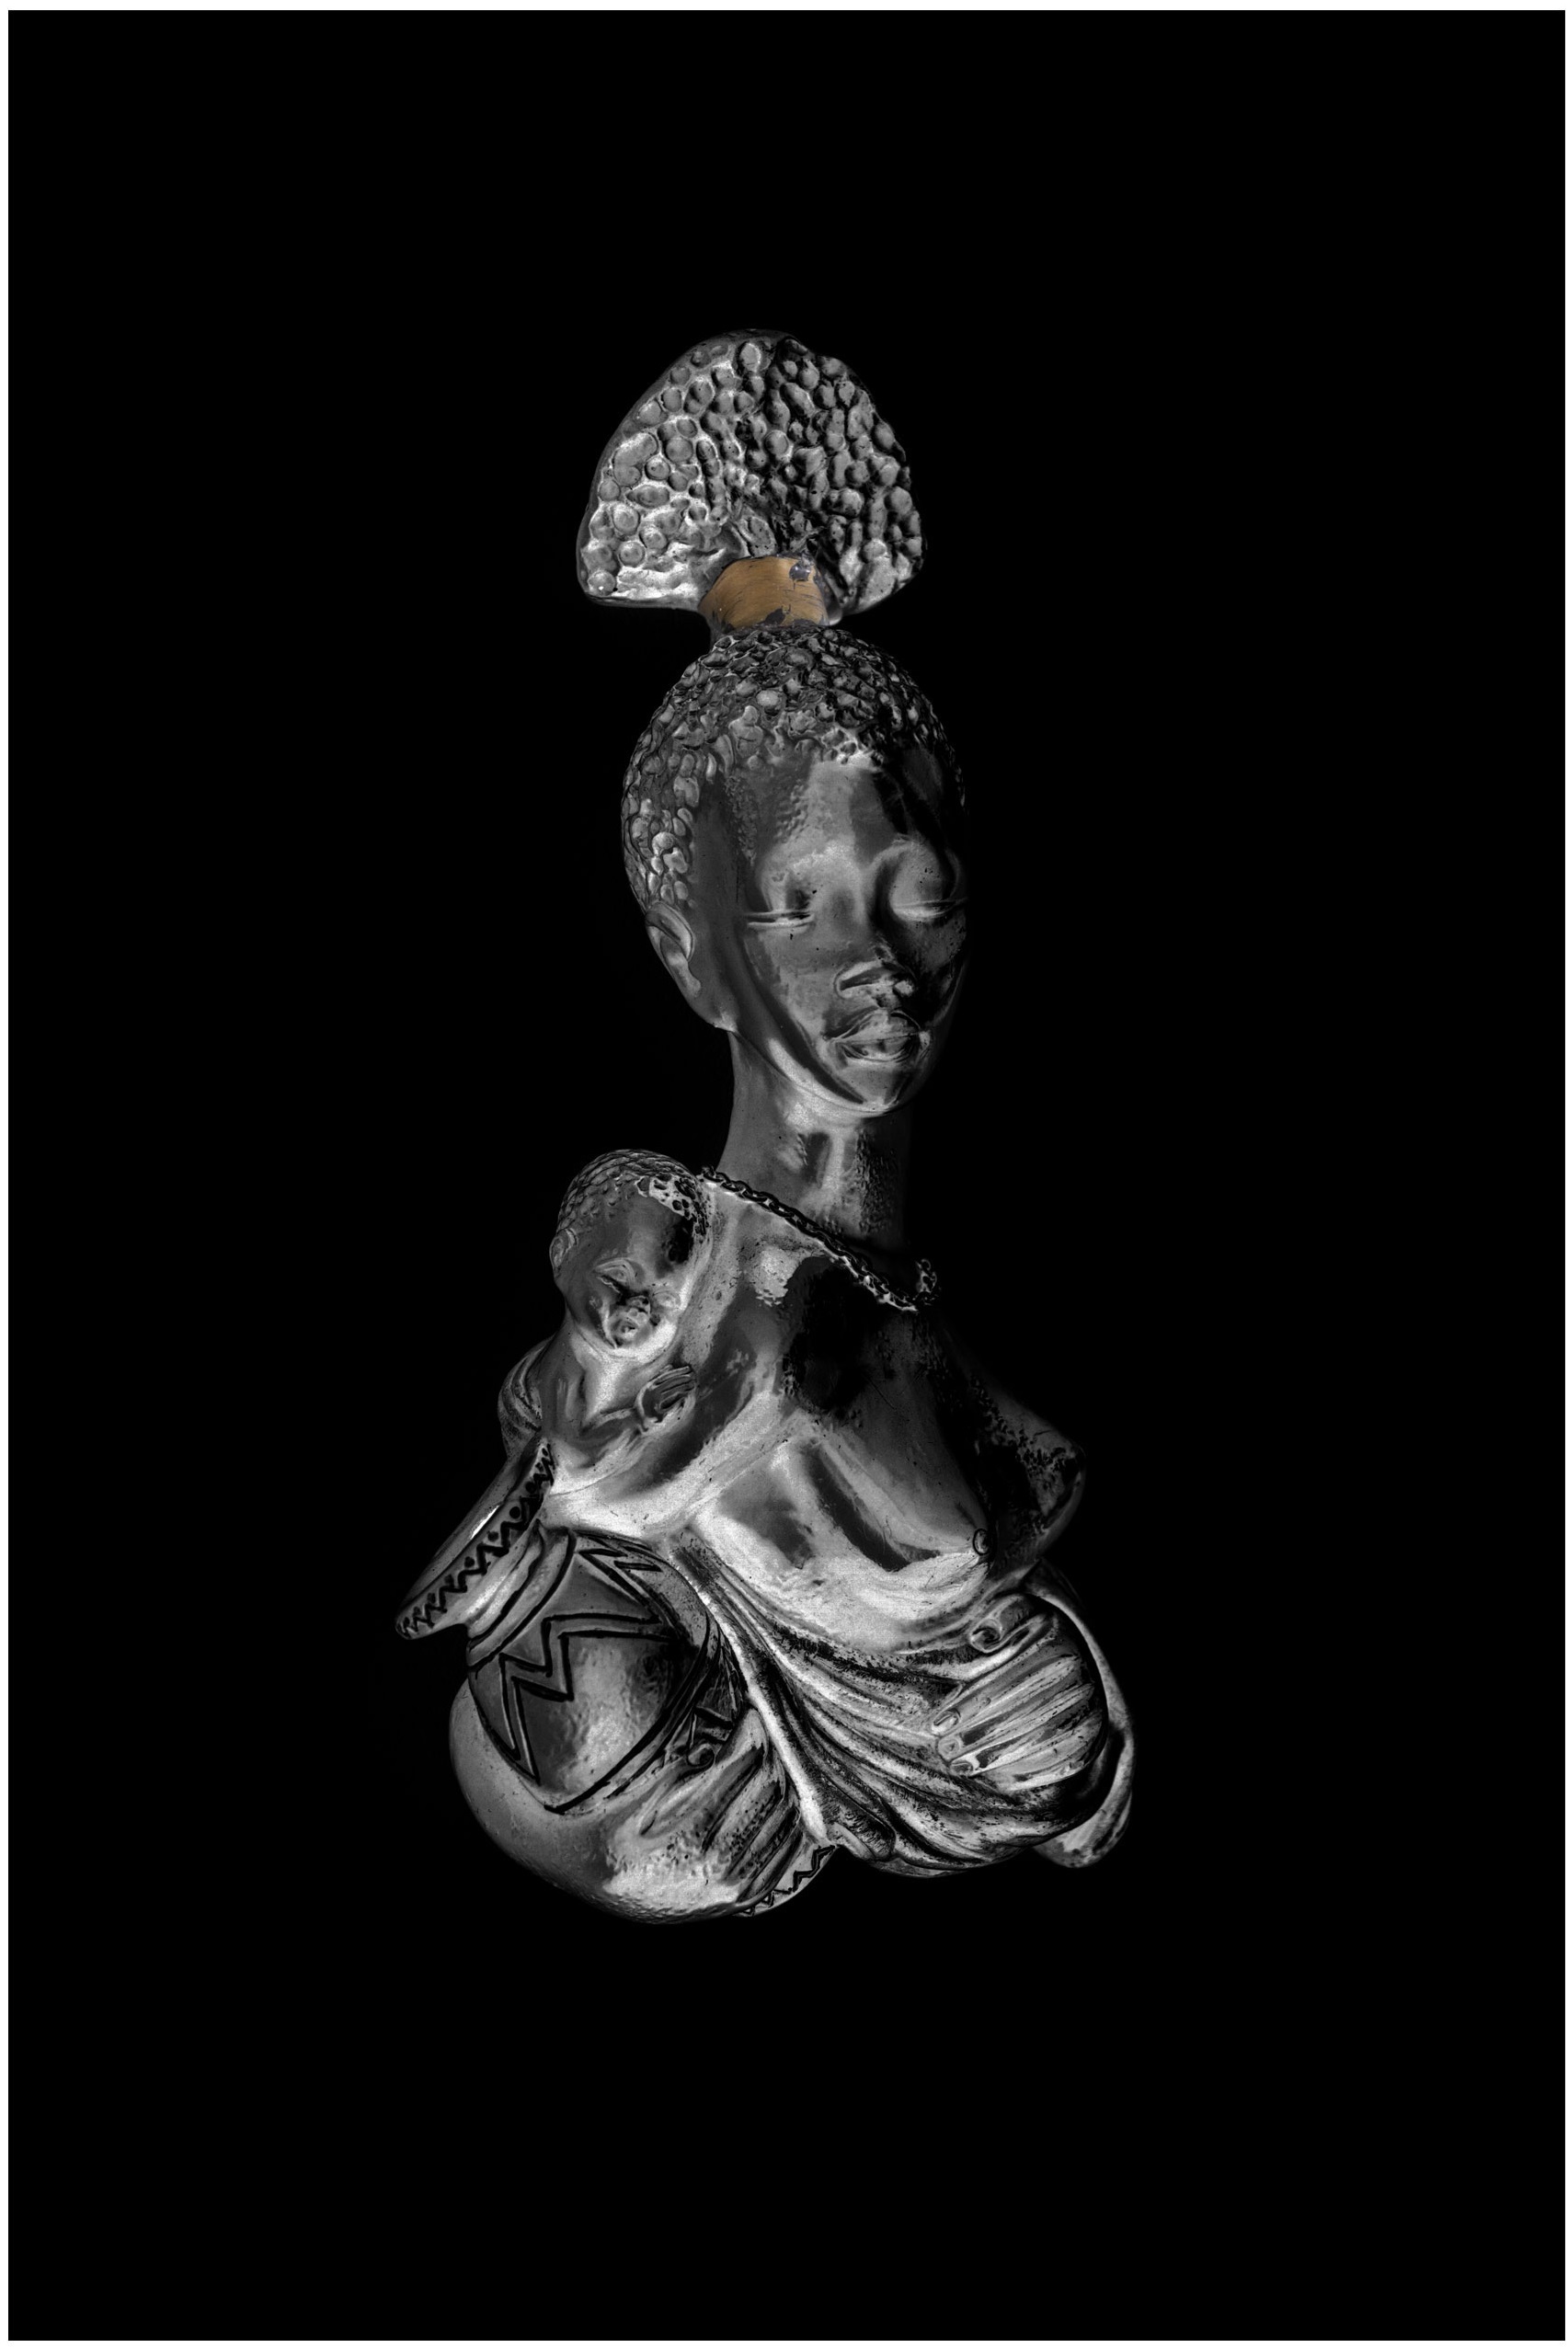 DAVID ADIKA
UNTITLED (FIGURINE, 'MIZRACHI', NO. 010 B INVERSE) FROM “BLACK MARKET” (COLOR PHOTOGRAPHY, INKJET PRINT IN VARYING DIMENSIONS), 2020
Color photography, inkjet print
Varying dimensions Edition 1 of 3, with 2 APs